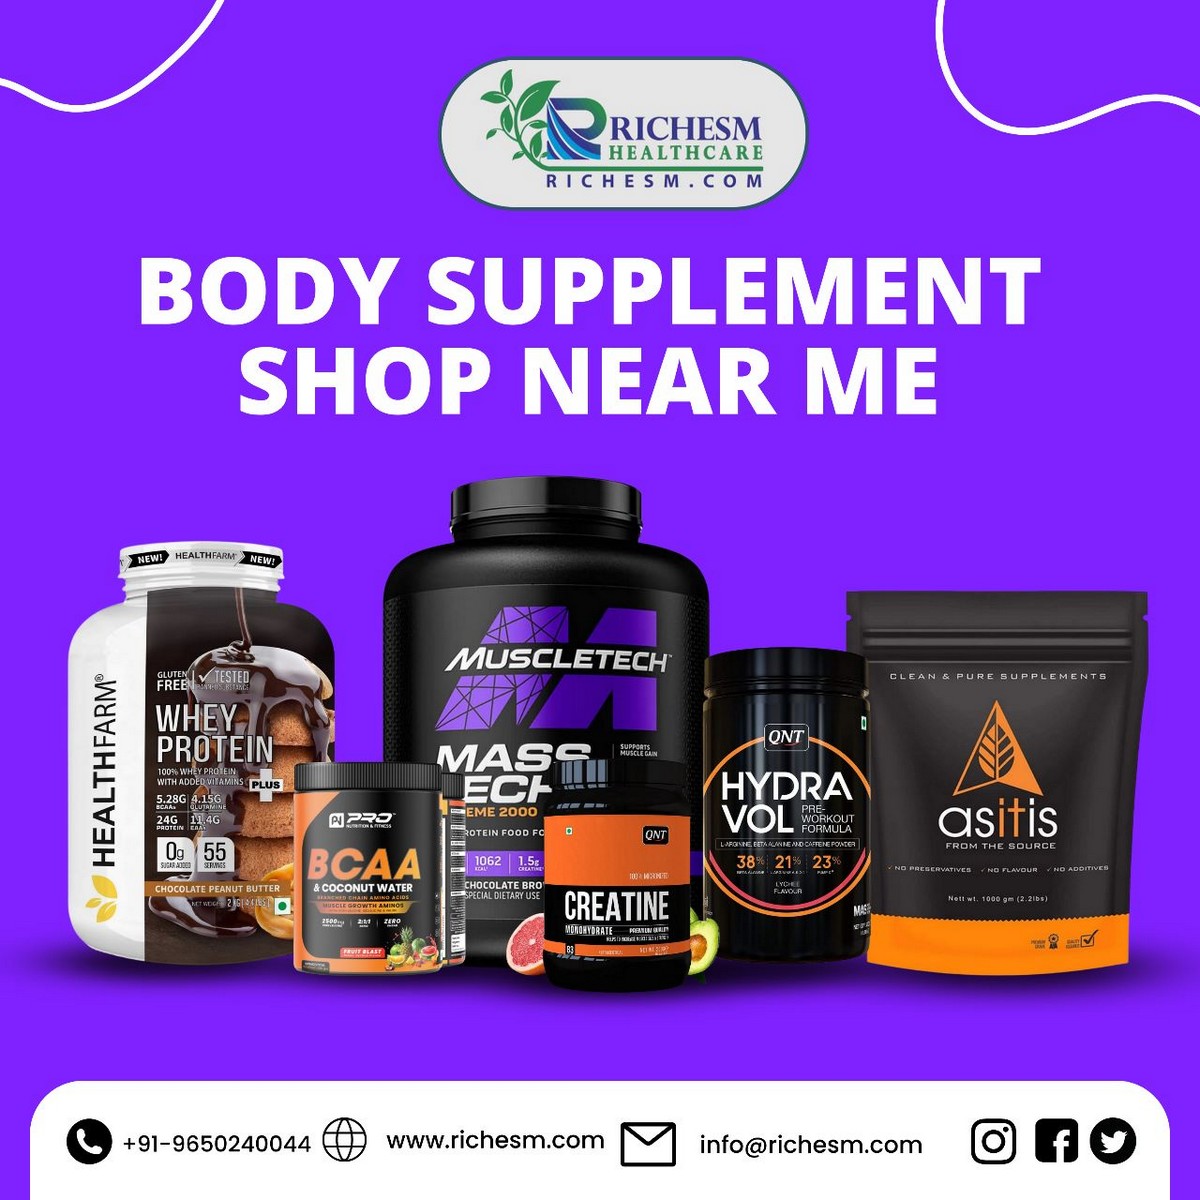 Find Online Your Body Supplement Shop Near Me